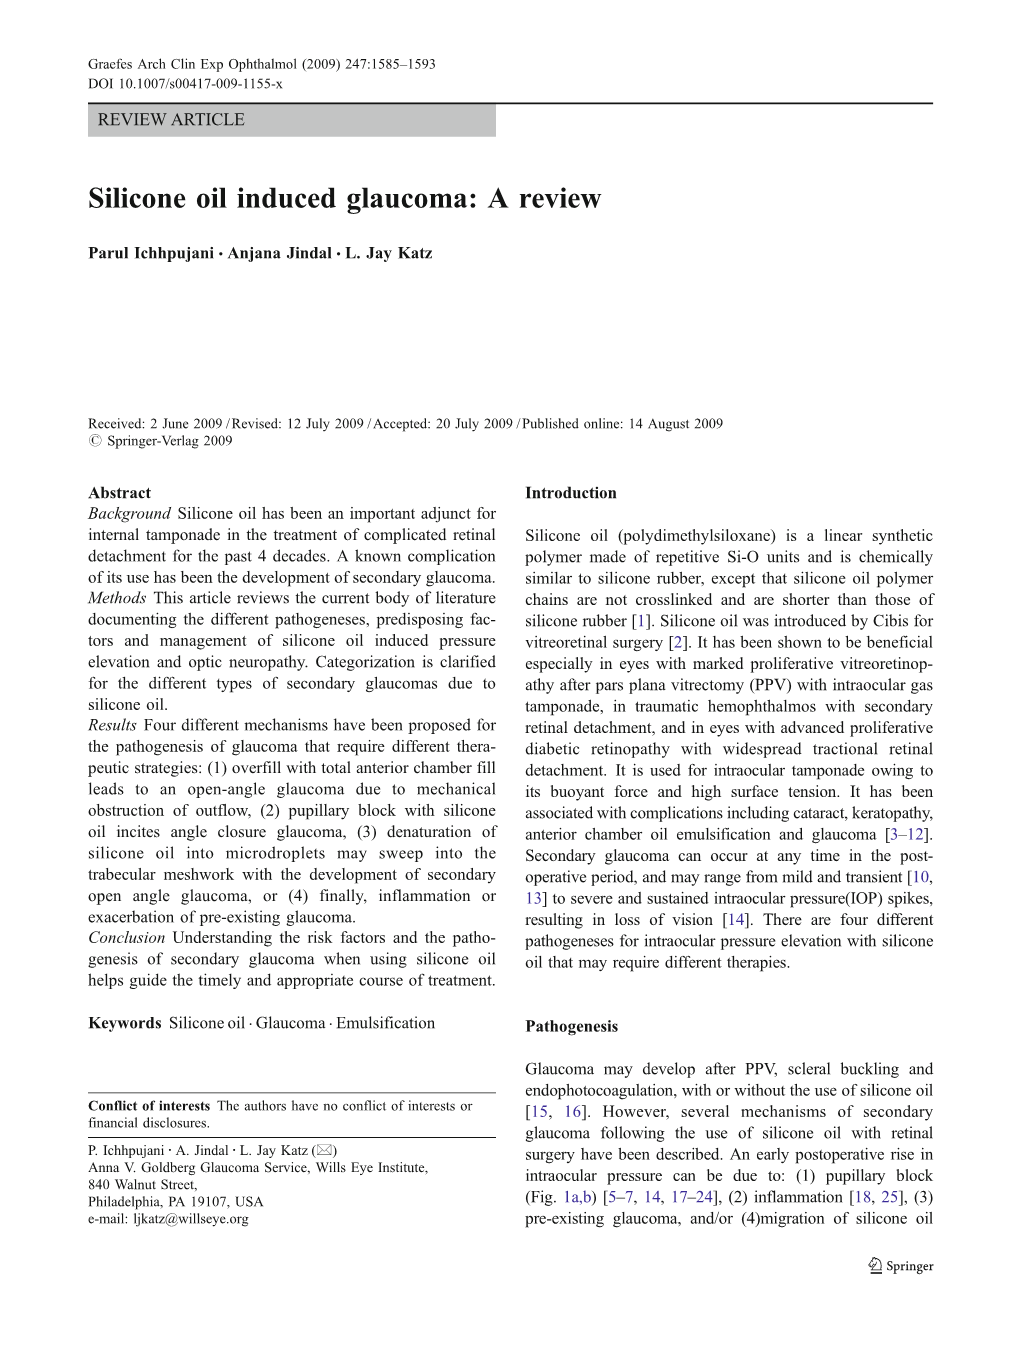 Silicone Oil Induced Glaucoma: a Review